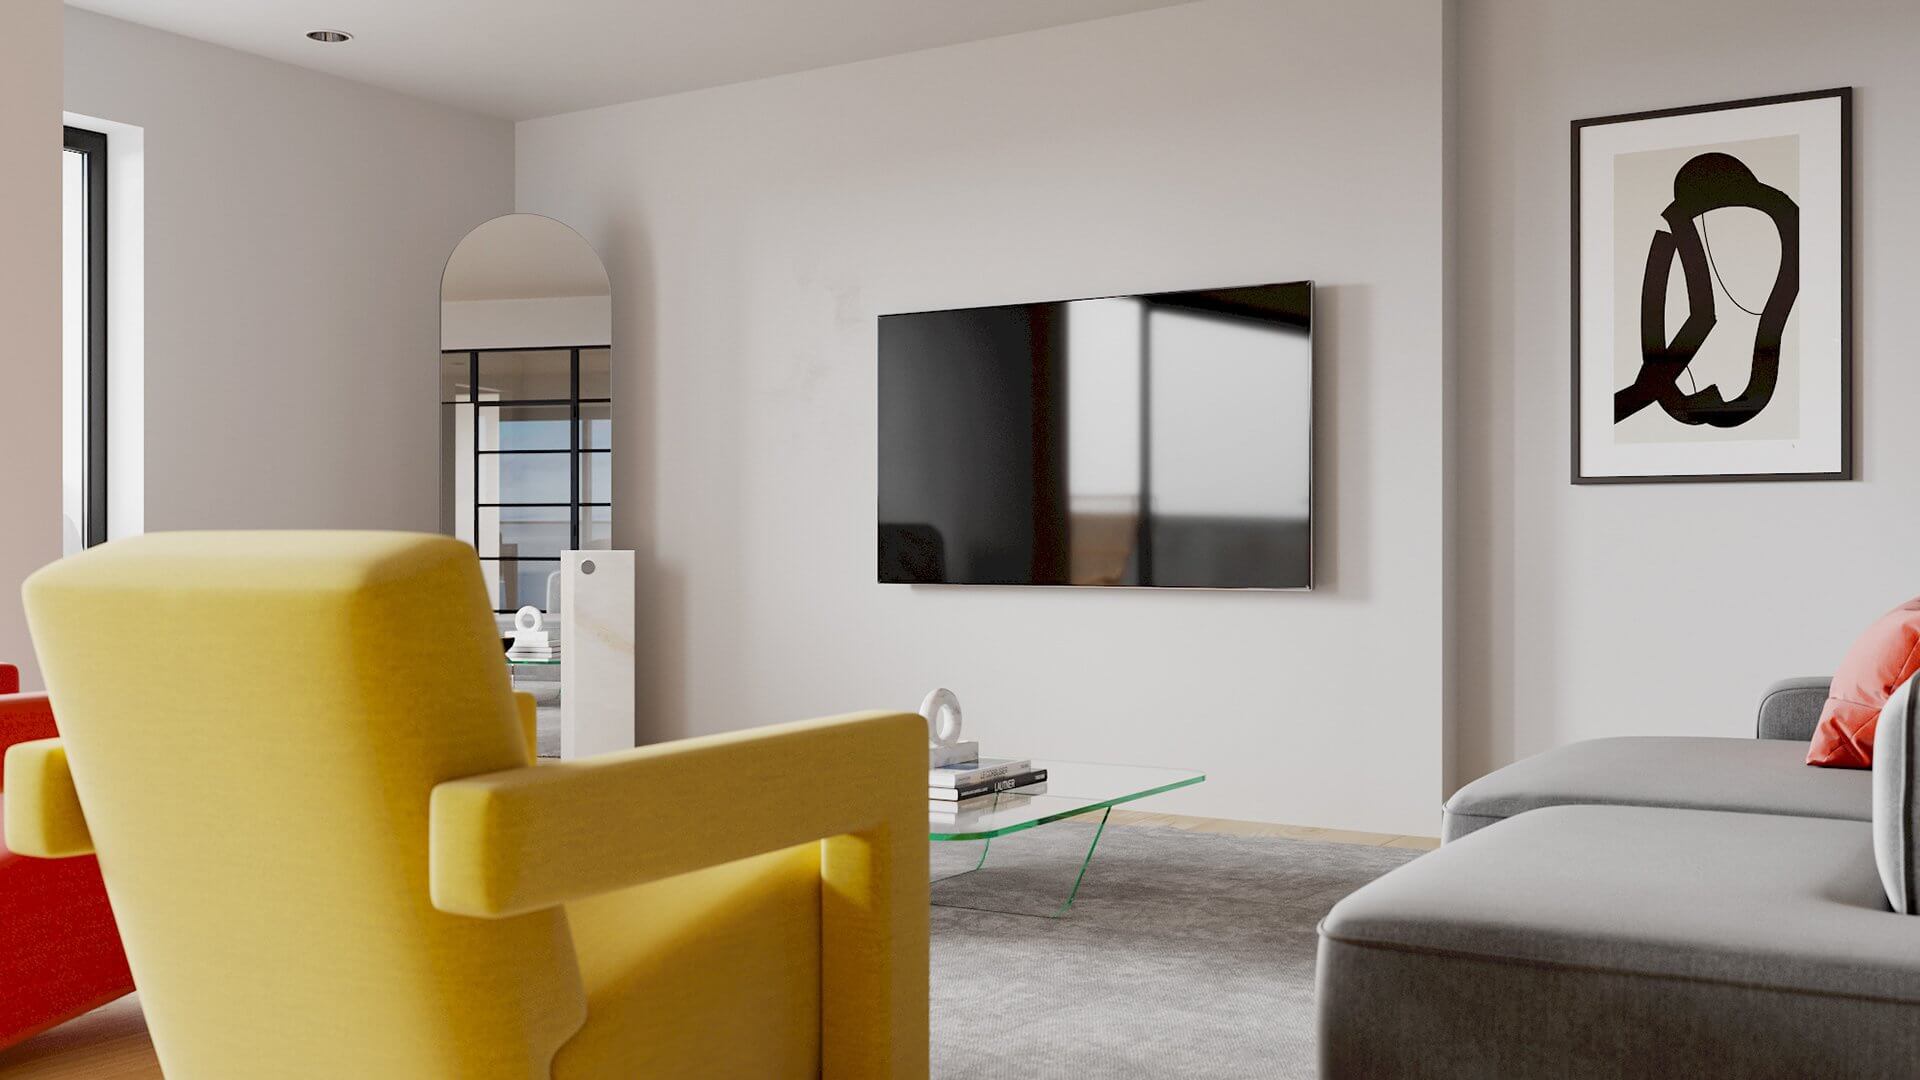 Apartment living room tv wall picture - cgi visualization